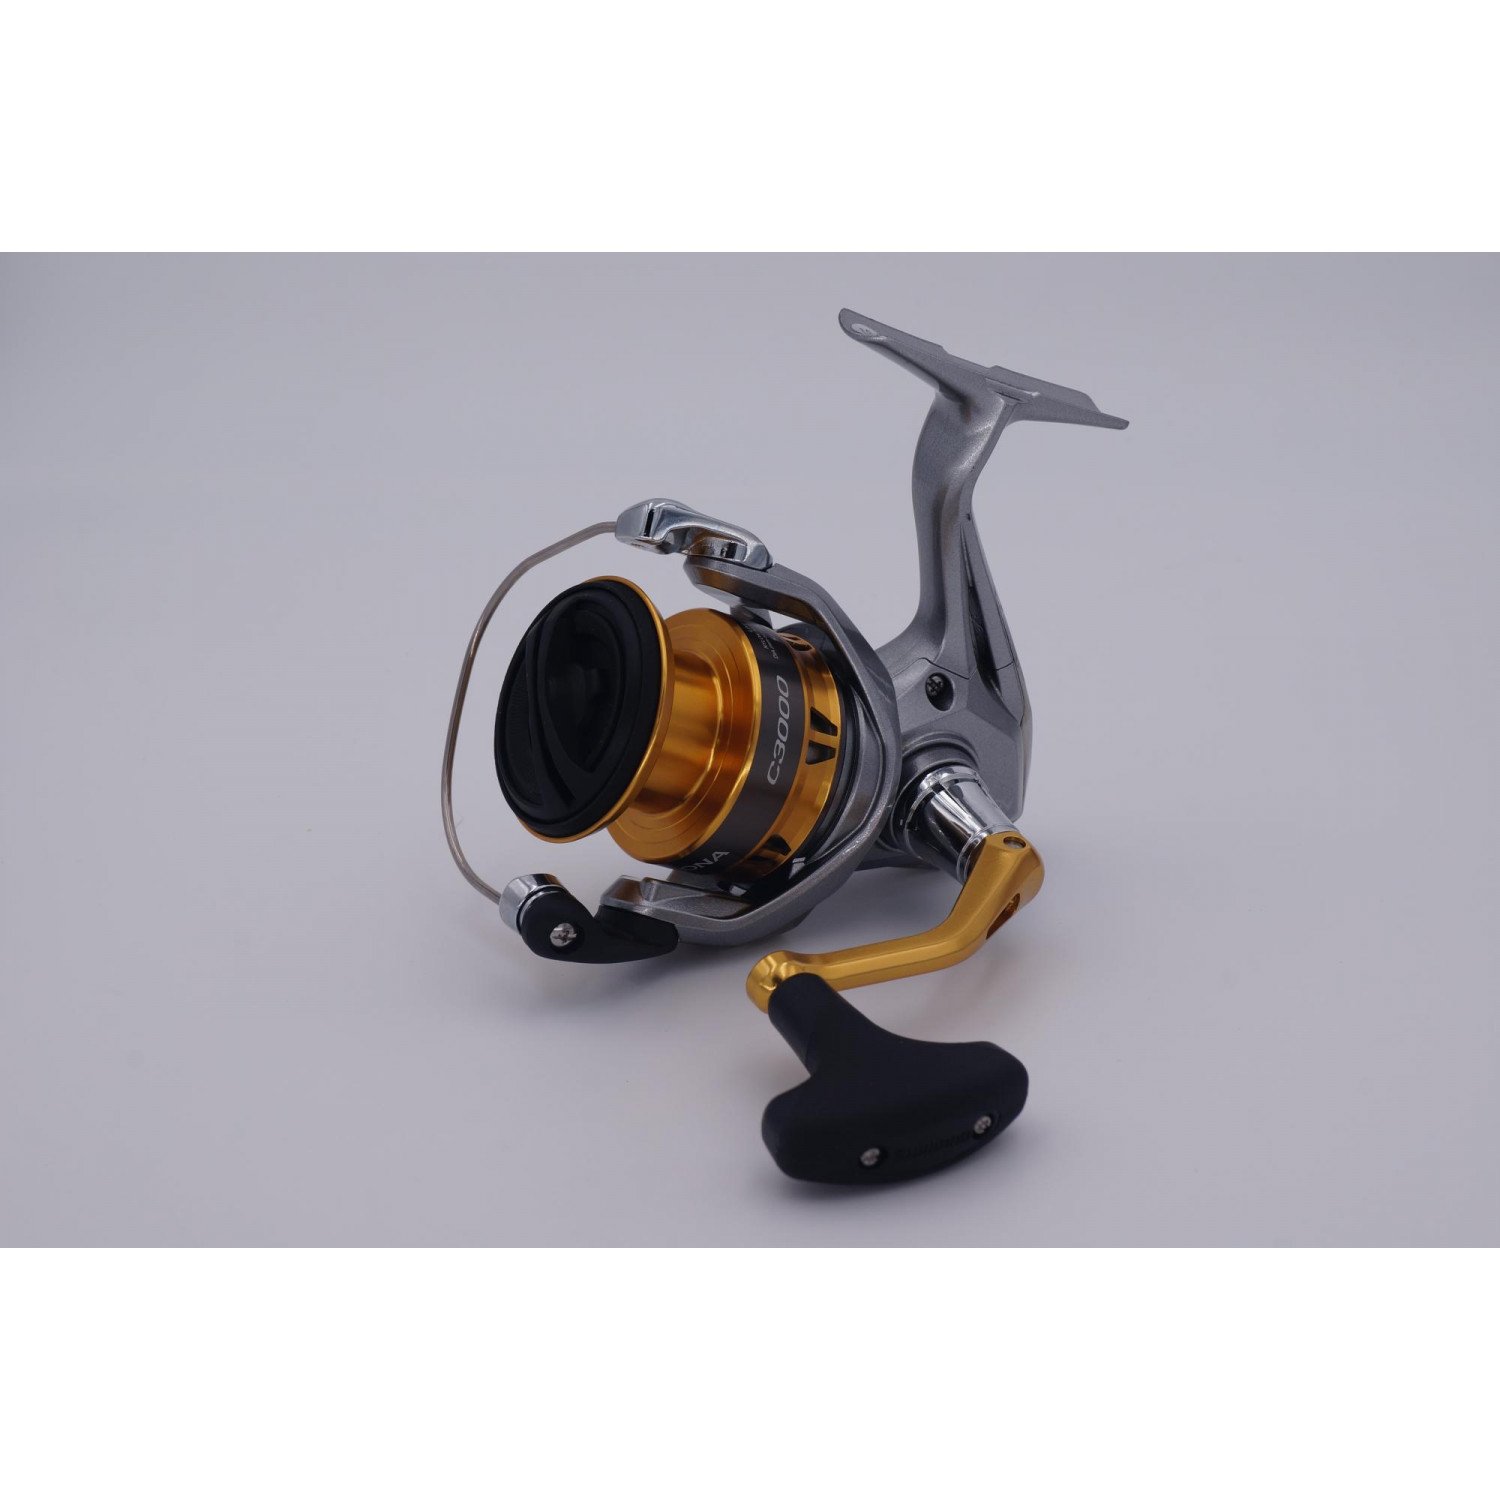 Shimano Sedona C3000 HG FI, Spinning reel with front drag, Signs of use